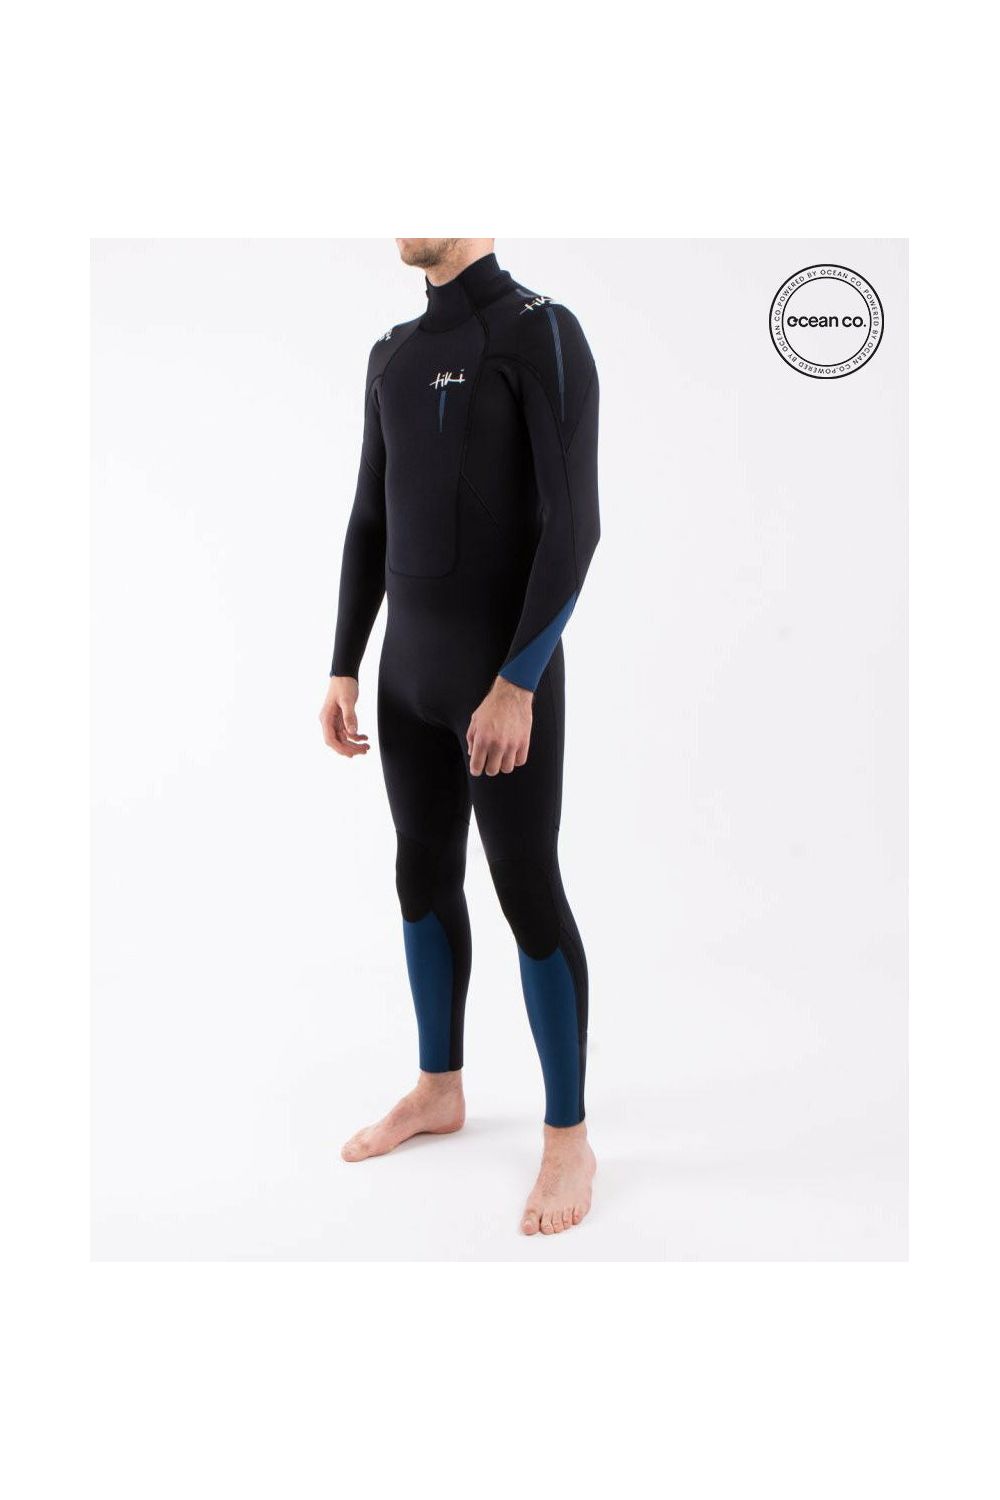 Tiki Mens Tech 5/4/3 GBS Wetsuit With Back Zip